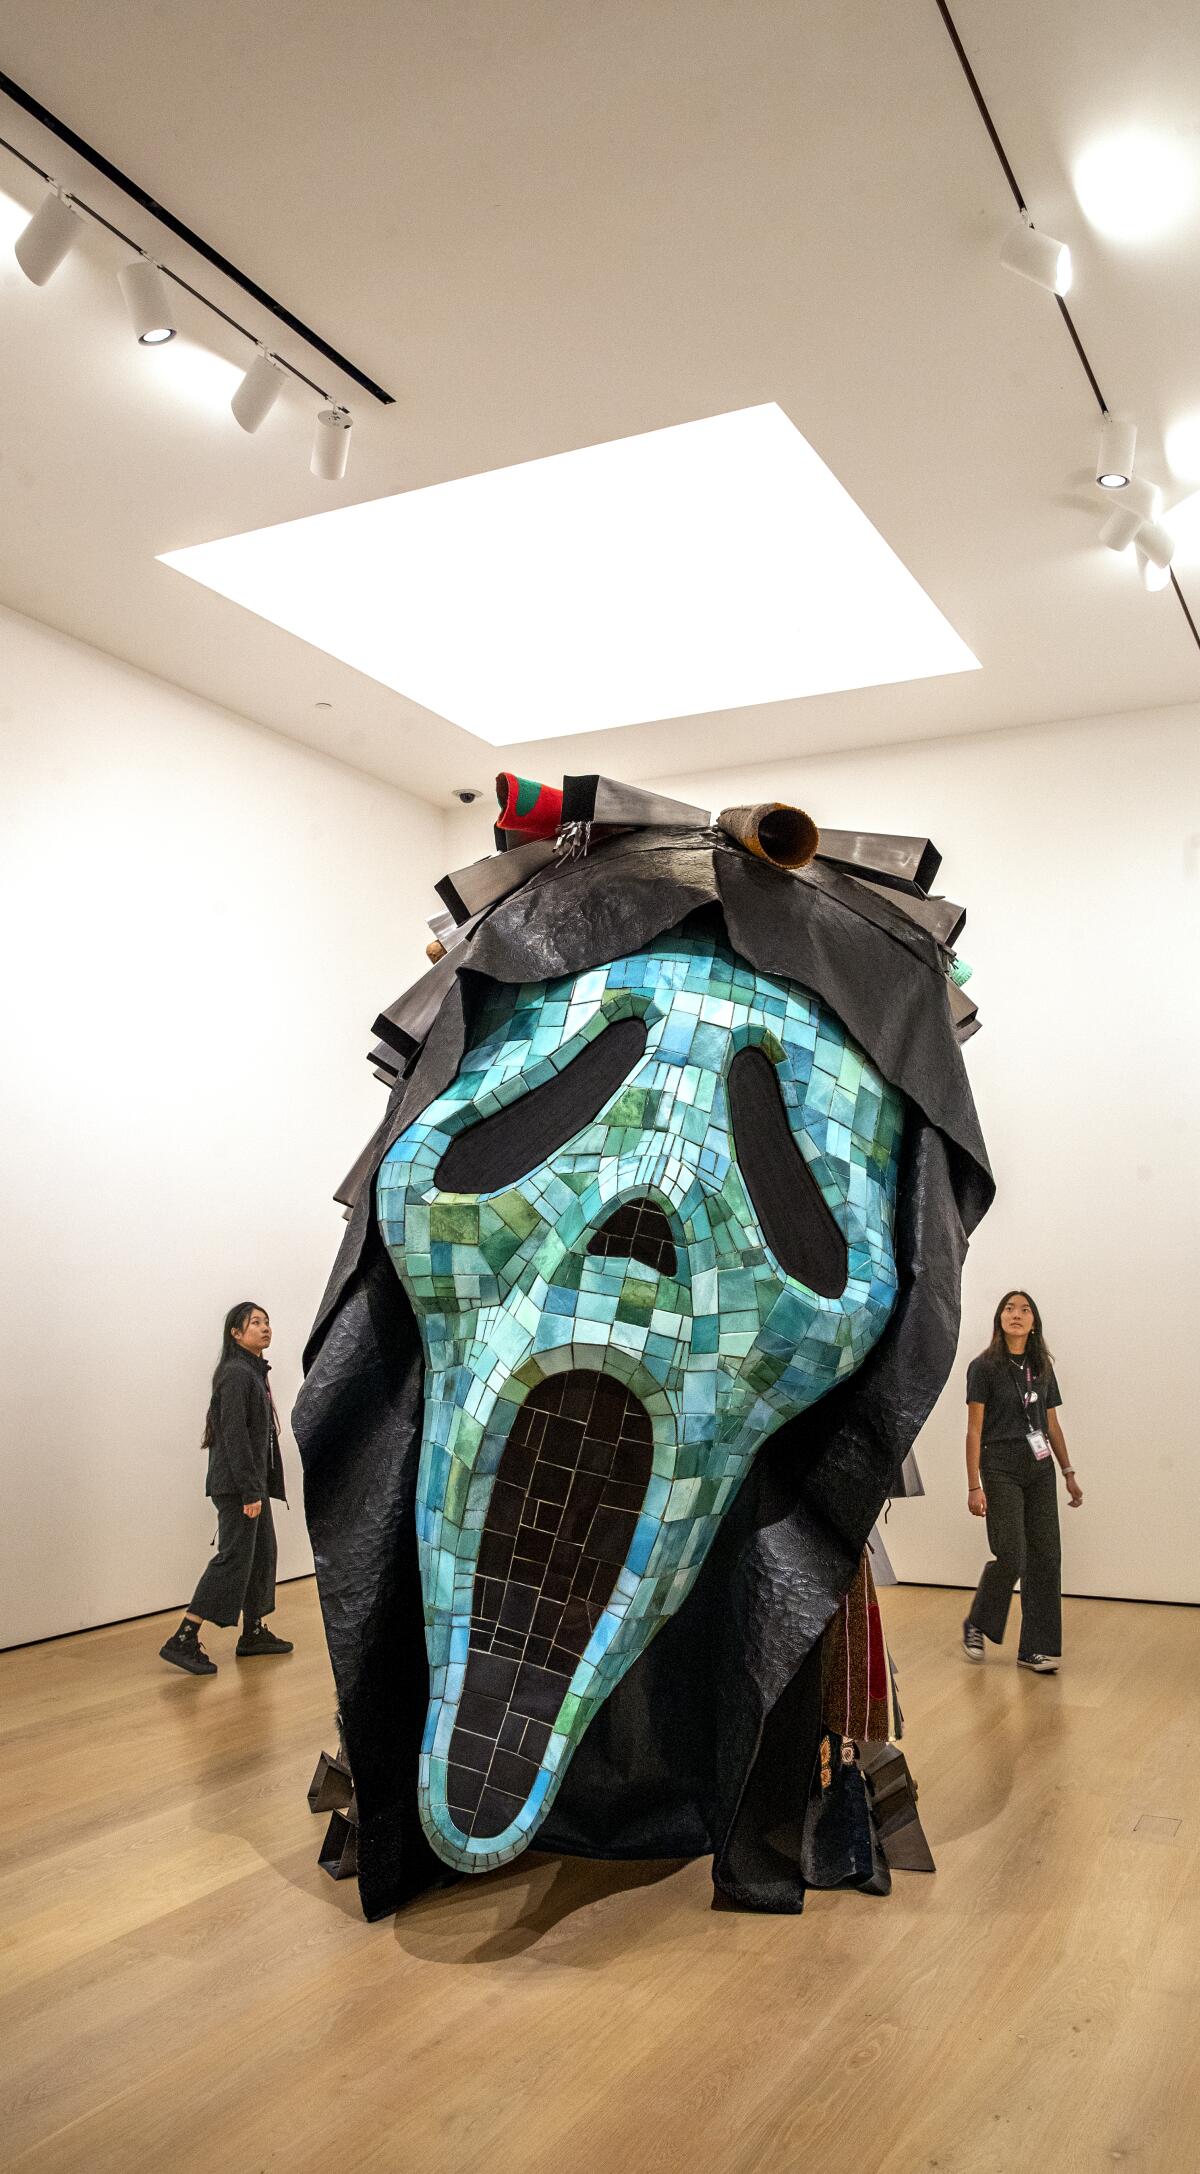 A view of a large-scale sculpture showing the mask from the "Scream" movies rendered in turquoise and cow bells